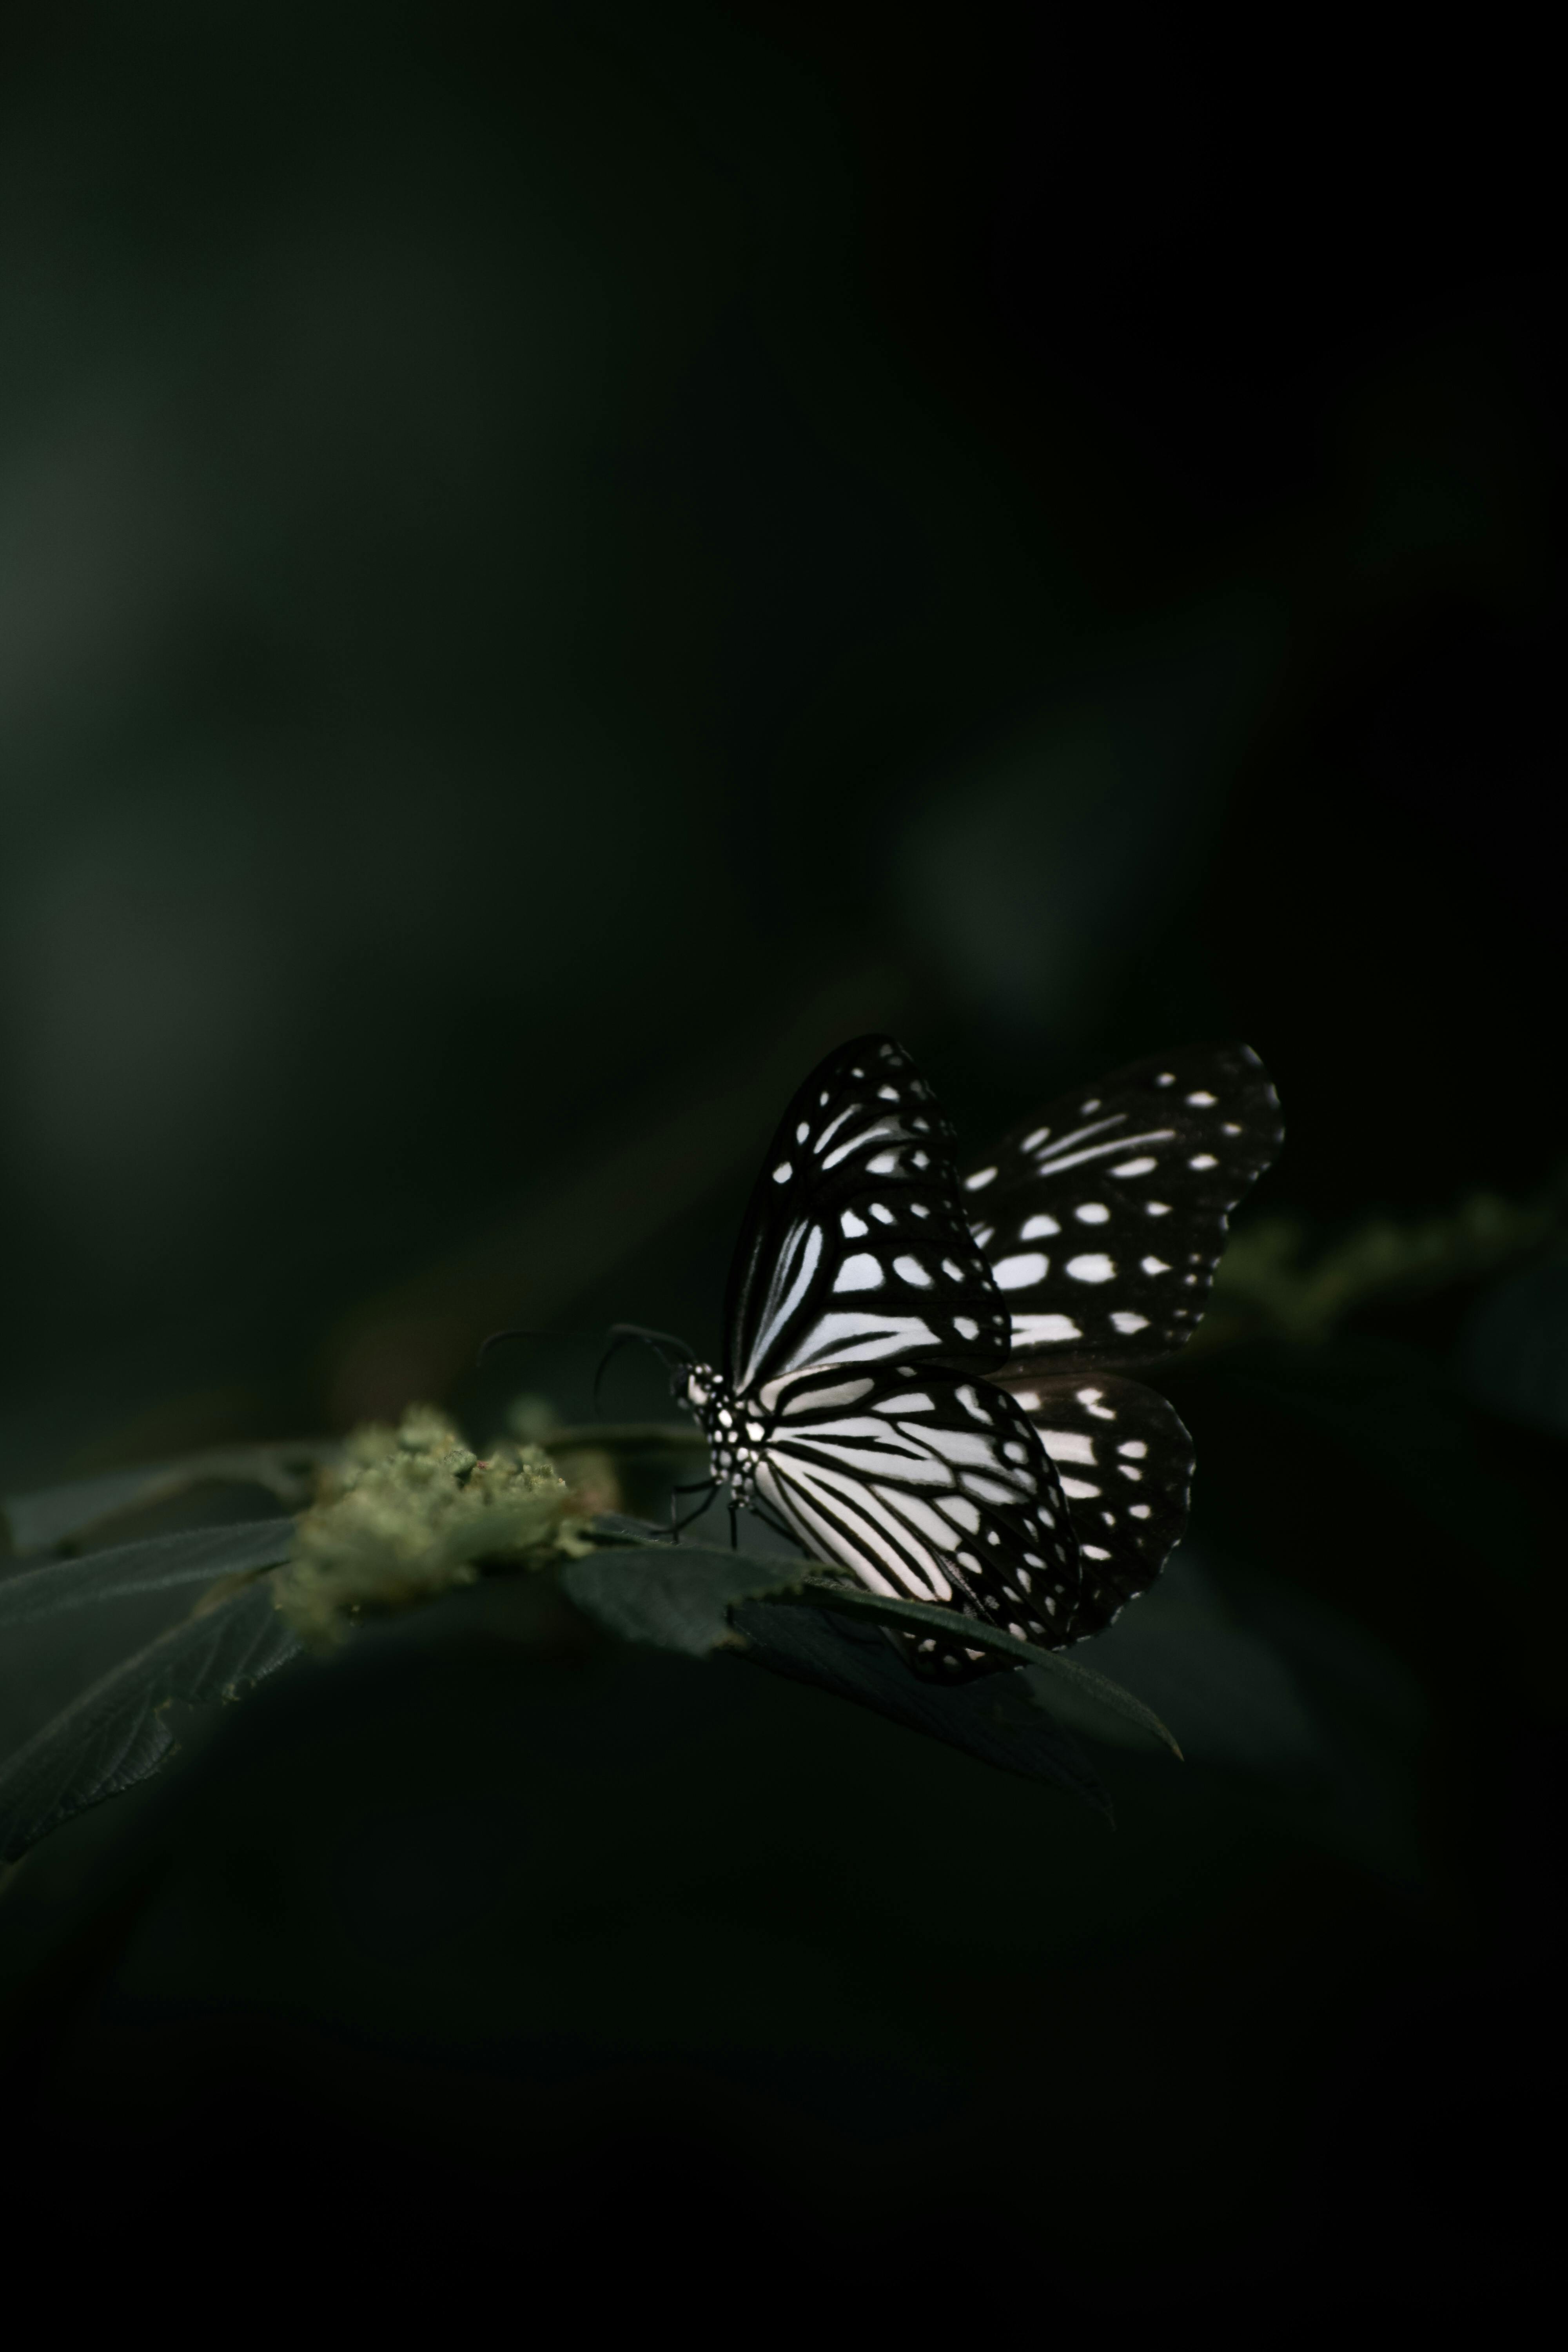 Wallpaper Brown Black and White Butterfly Background  Download Free Image